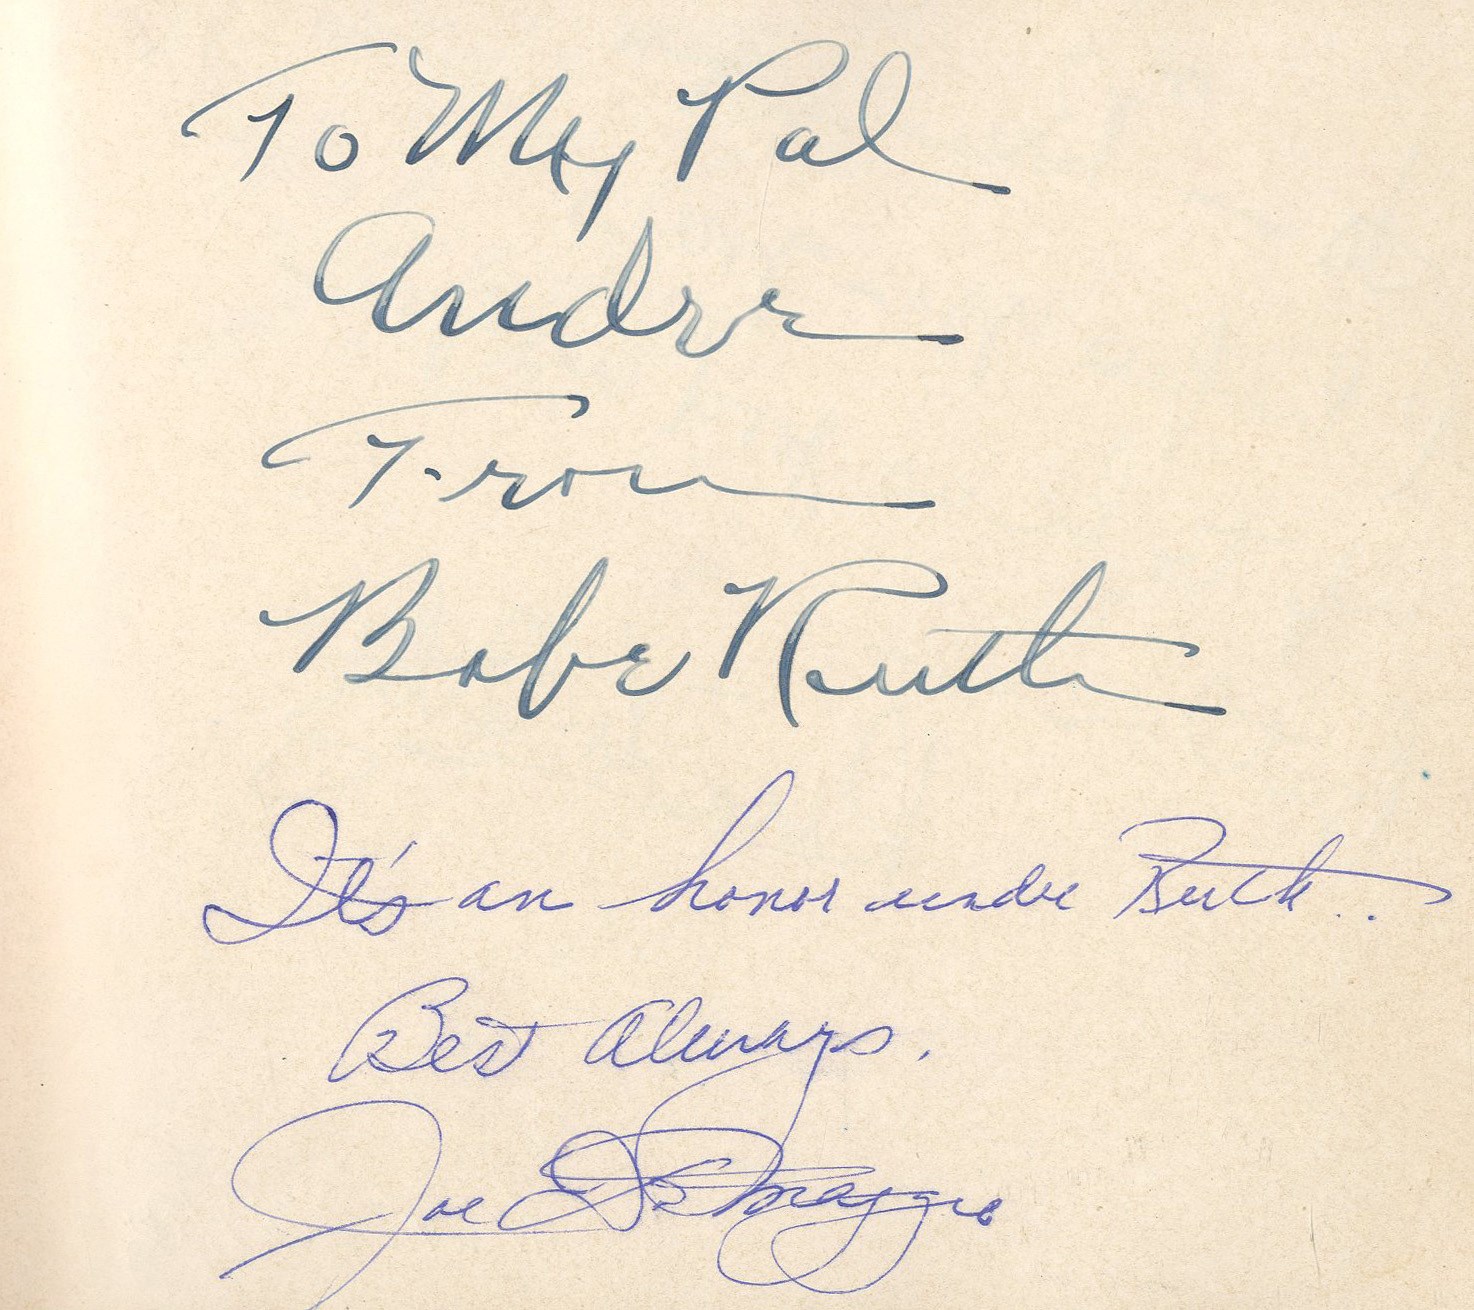 - The Stork Club Autograph Book with Babe Ruth & Joe DiMaggio Together - A Who's Who of 1940s-50s Manhattan Elite (PSA)